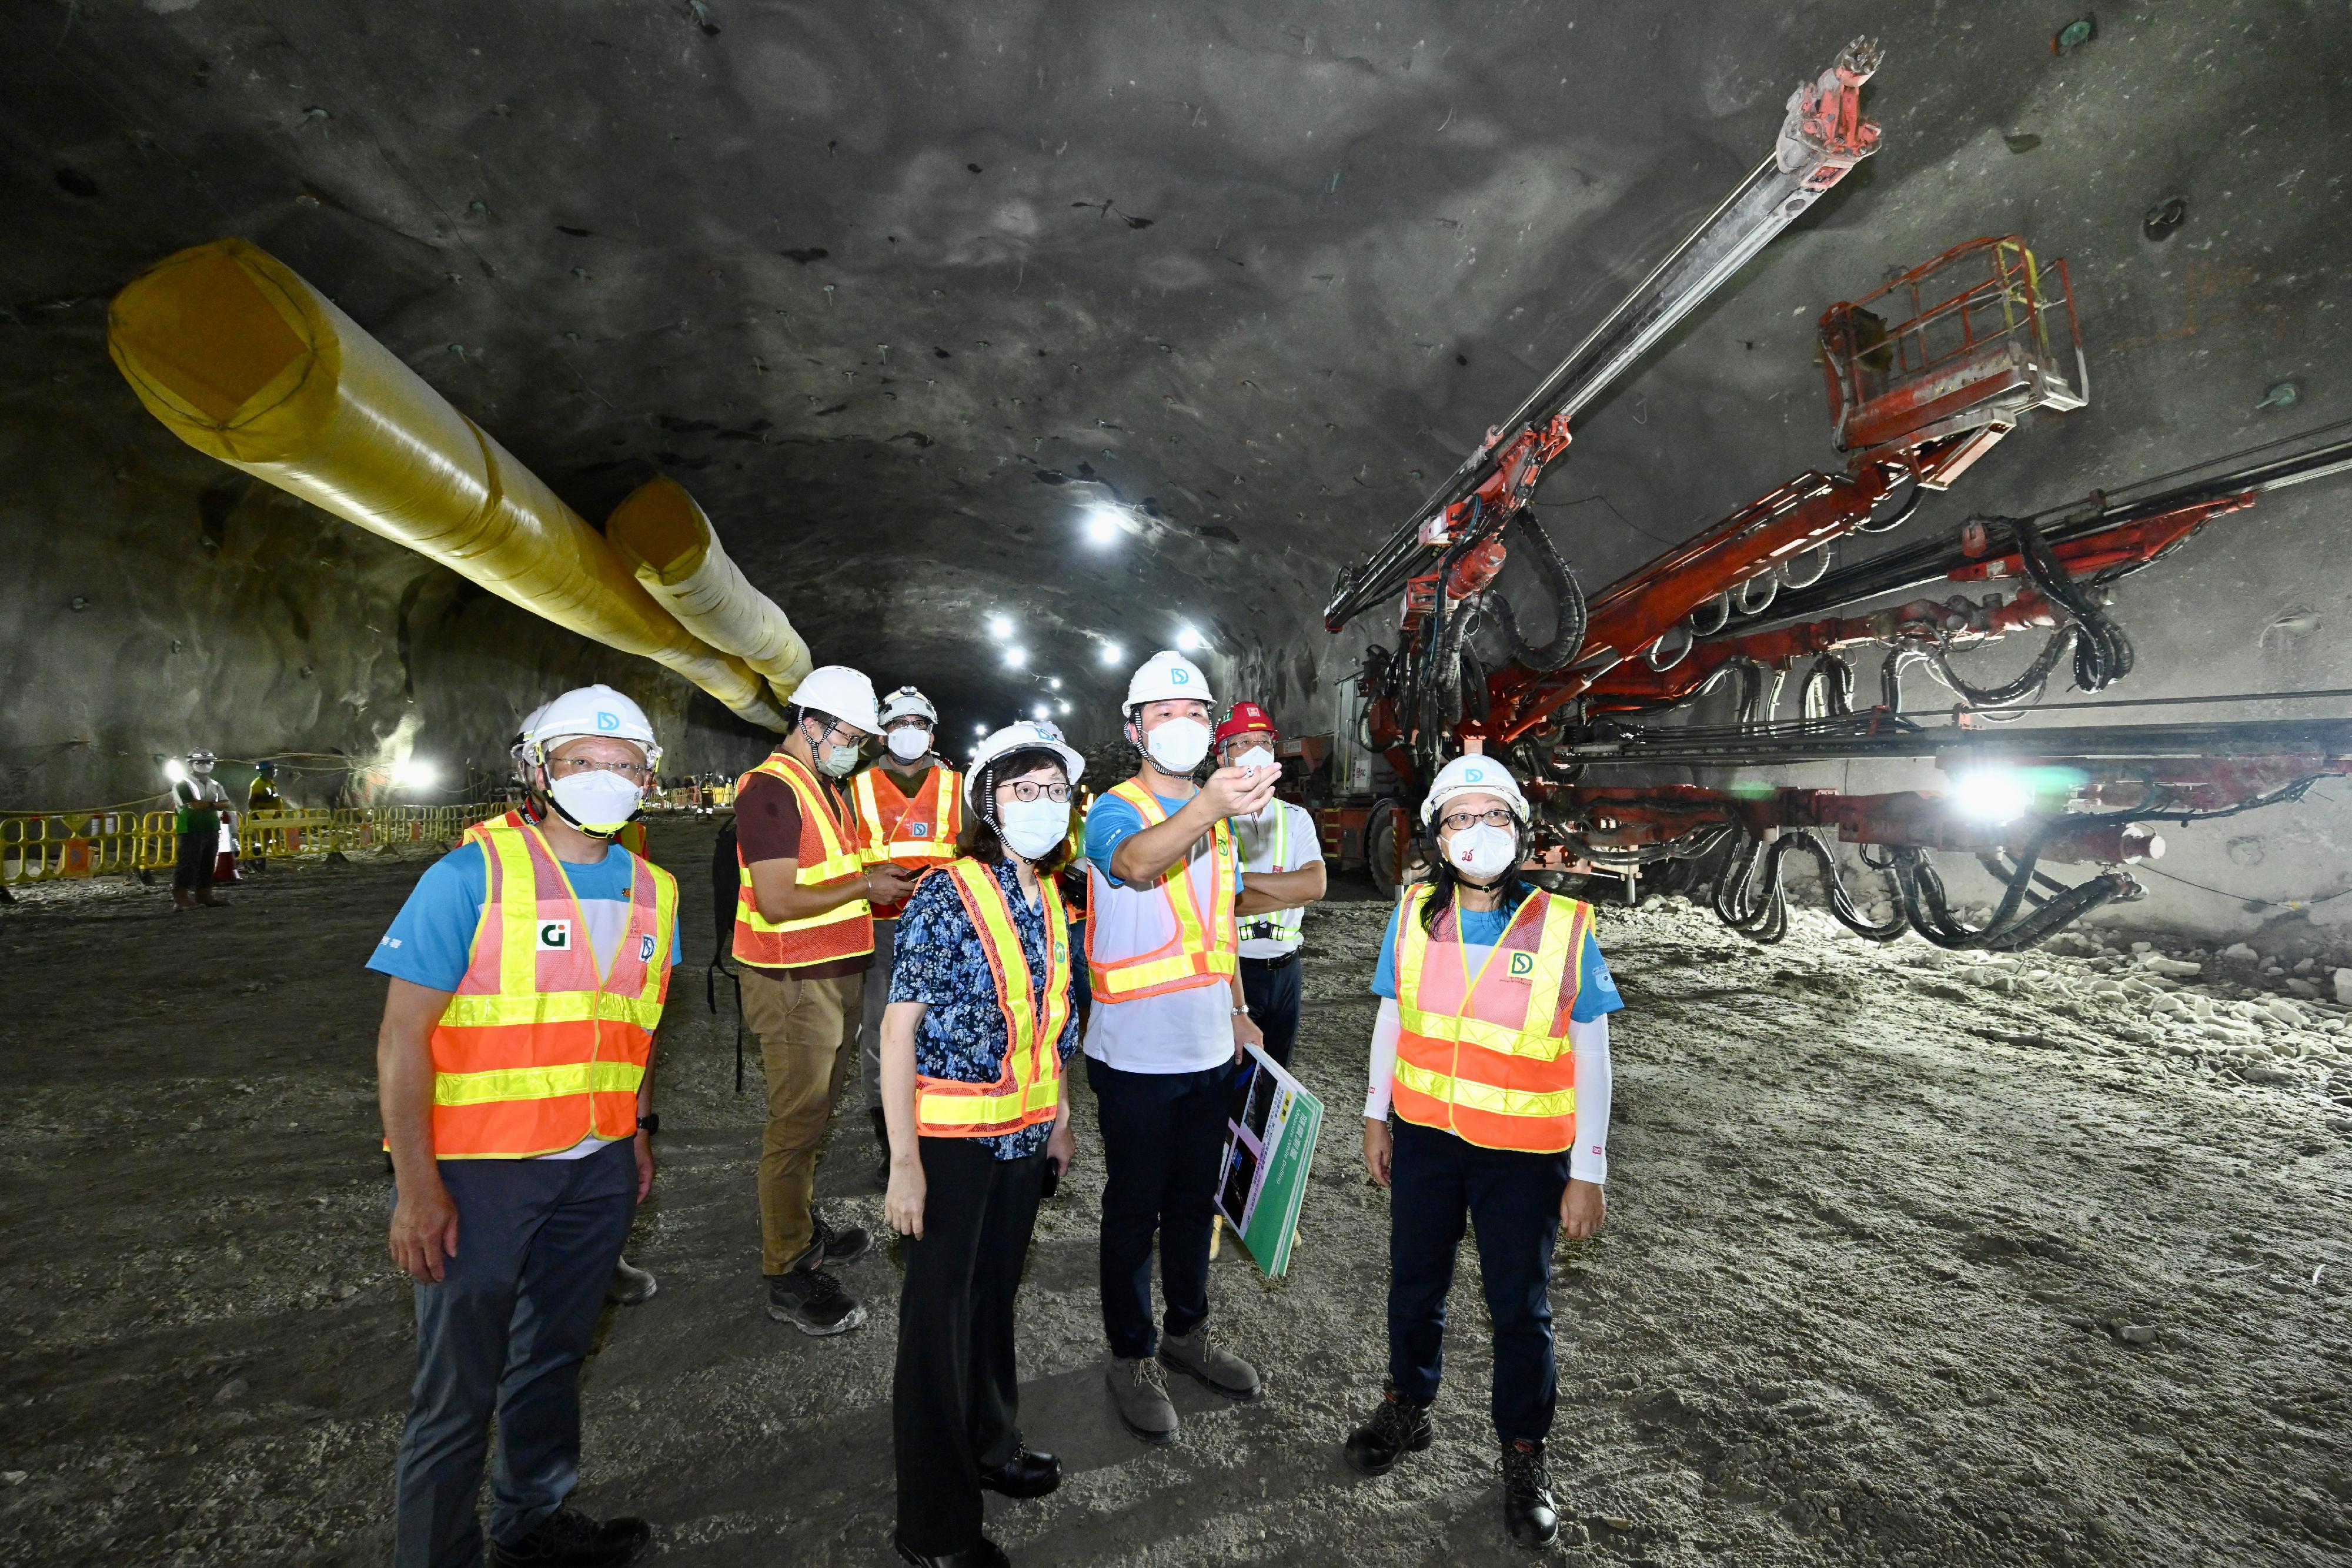 The Secretary for Development, Ms Bernadette Linn (third right), accompanied by the Director of Drainage Services, Ms Alice Pang (first right), attended the Relocation of Sha Tin Sewage Treatment Works to Caverns - Community Liaison Centre Open Day today (August 27). Photo shows them visiting the works site in the cavern to learn about the progress and challenges of the works.